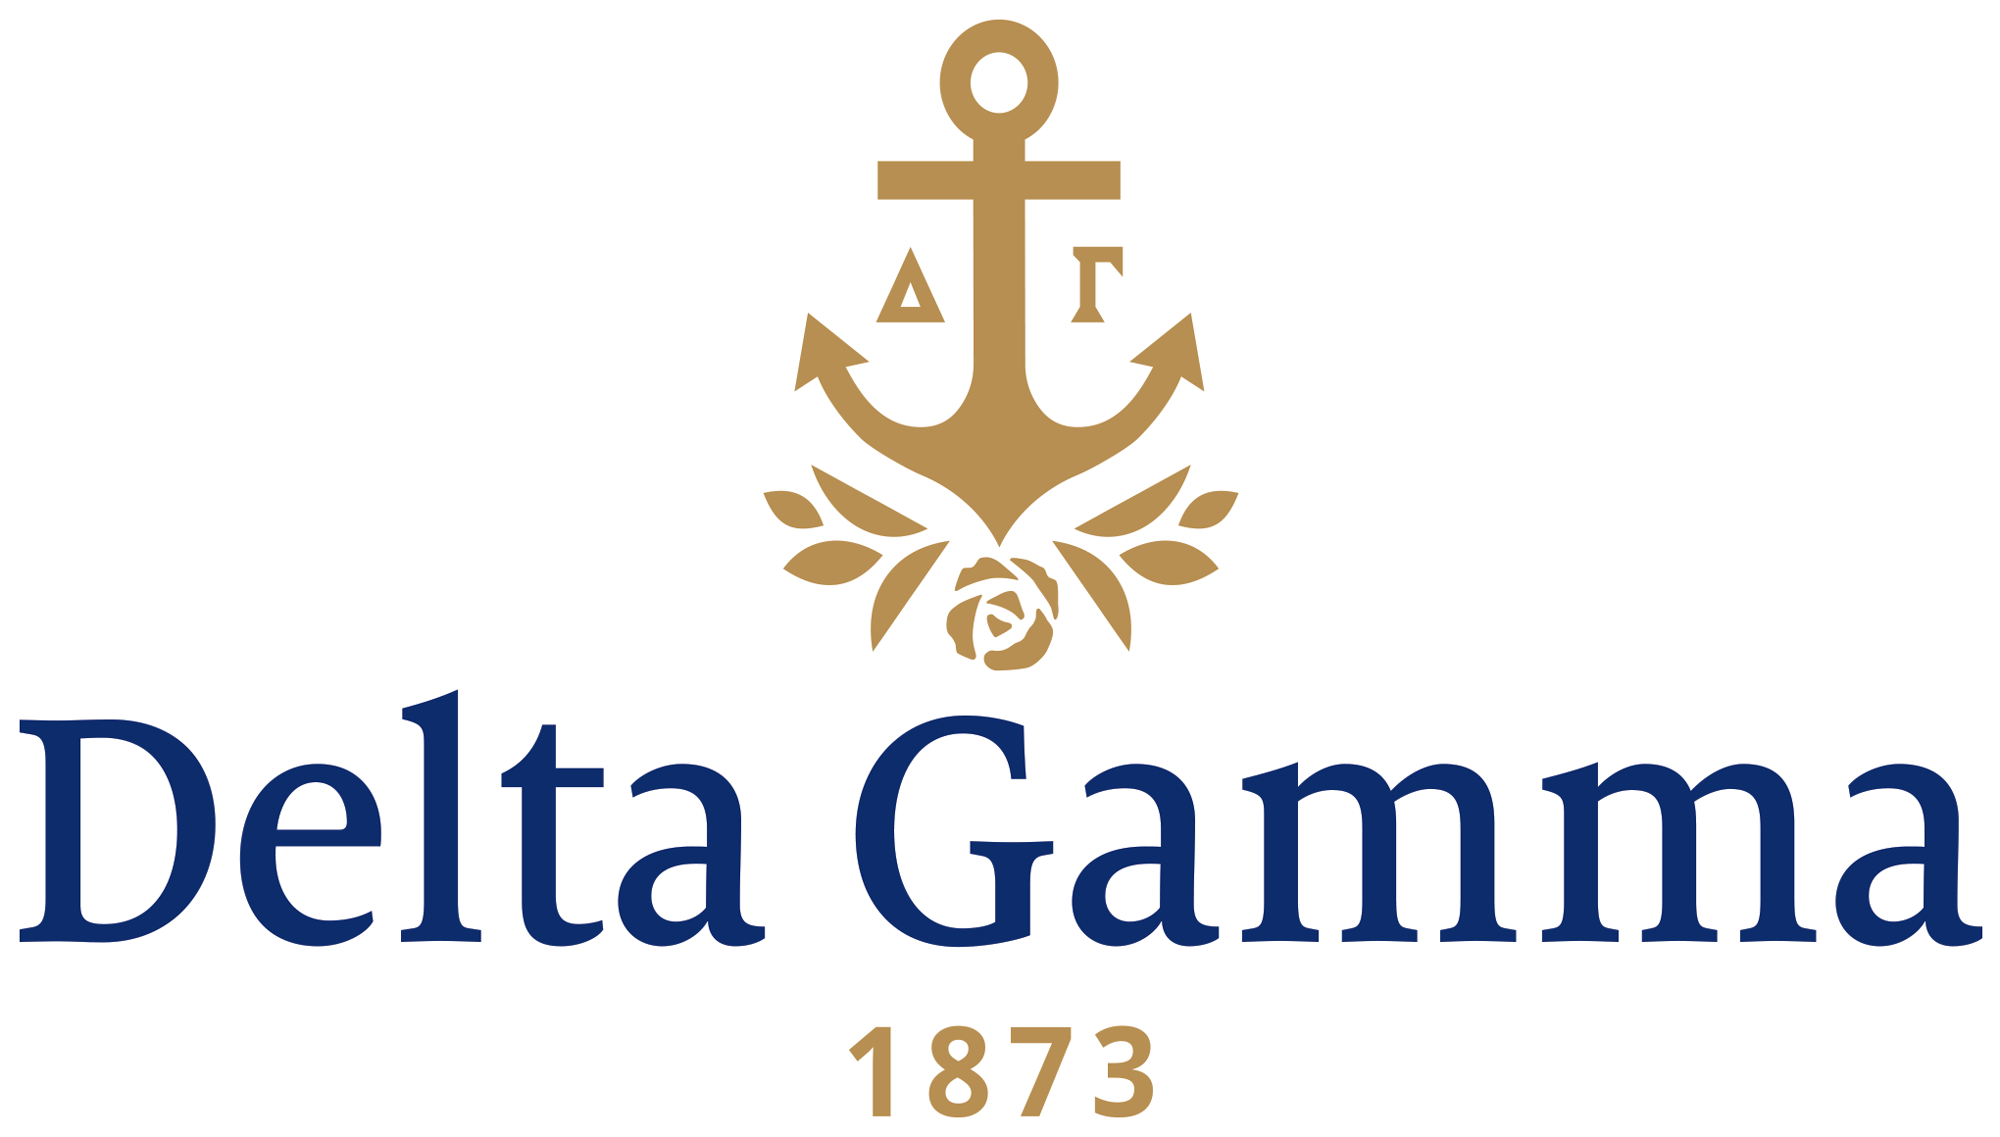 Library of delta gamma image download png files Clipart 